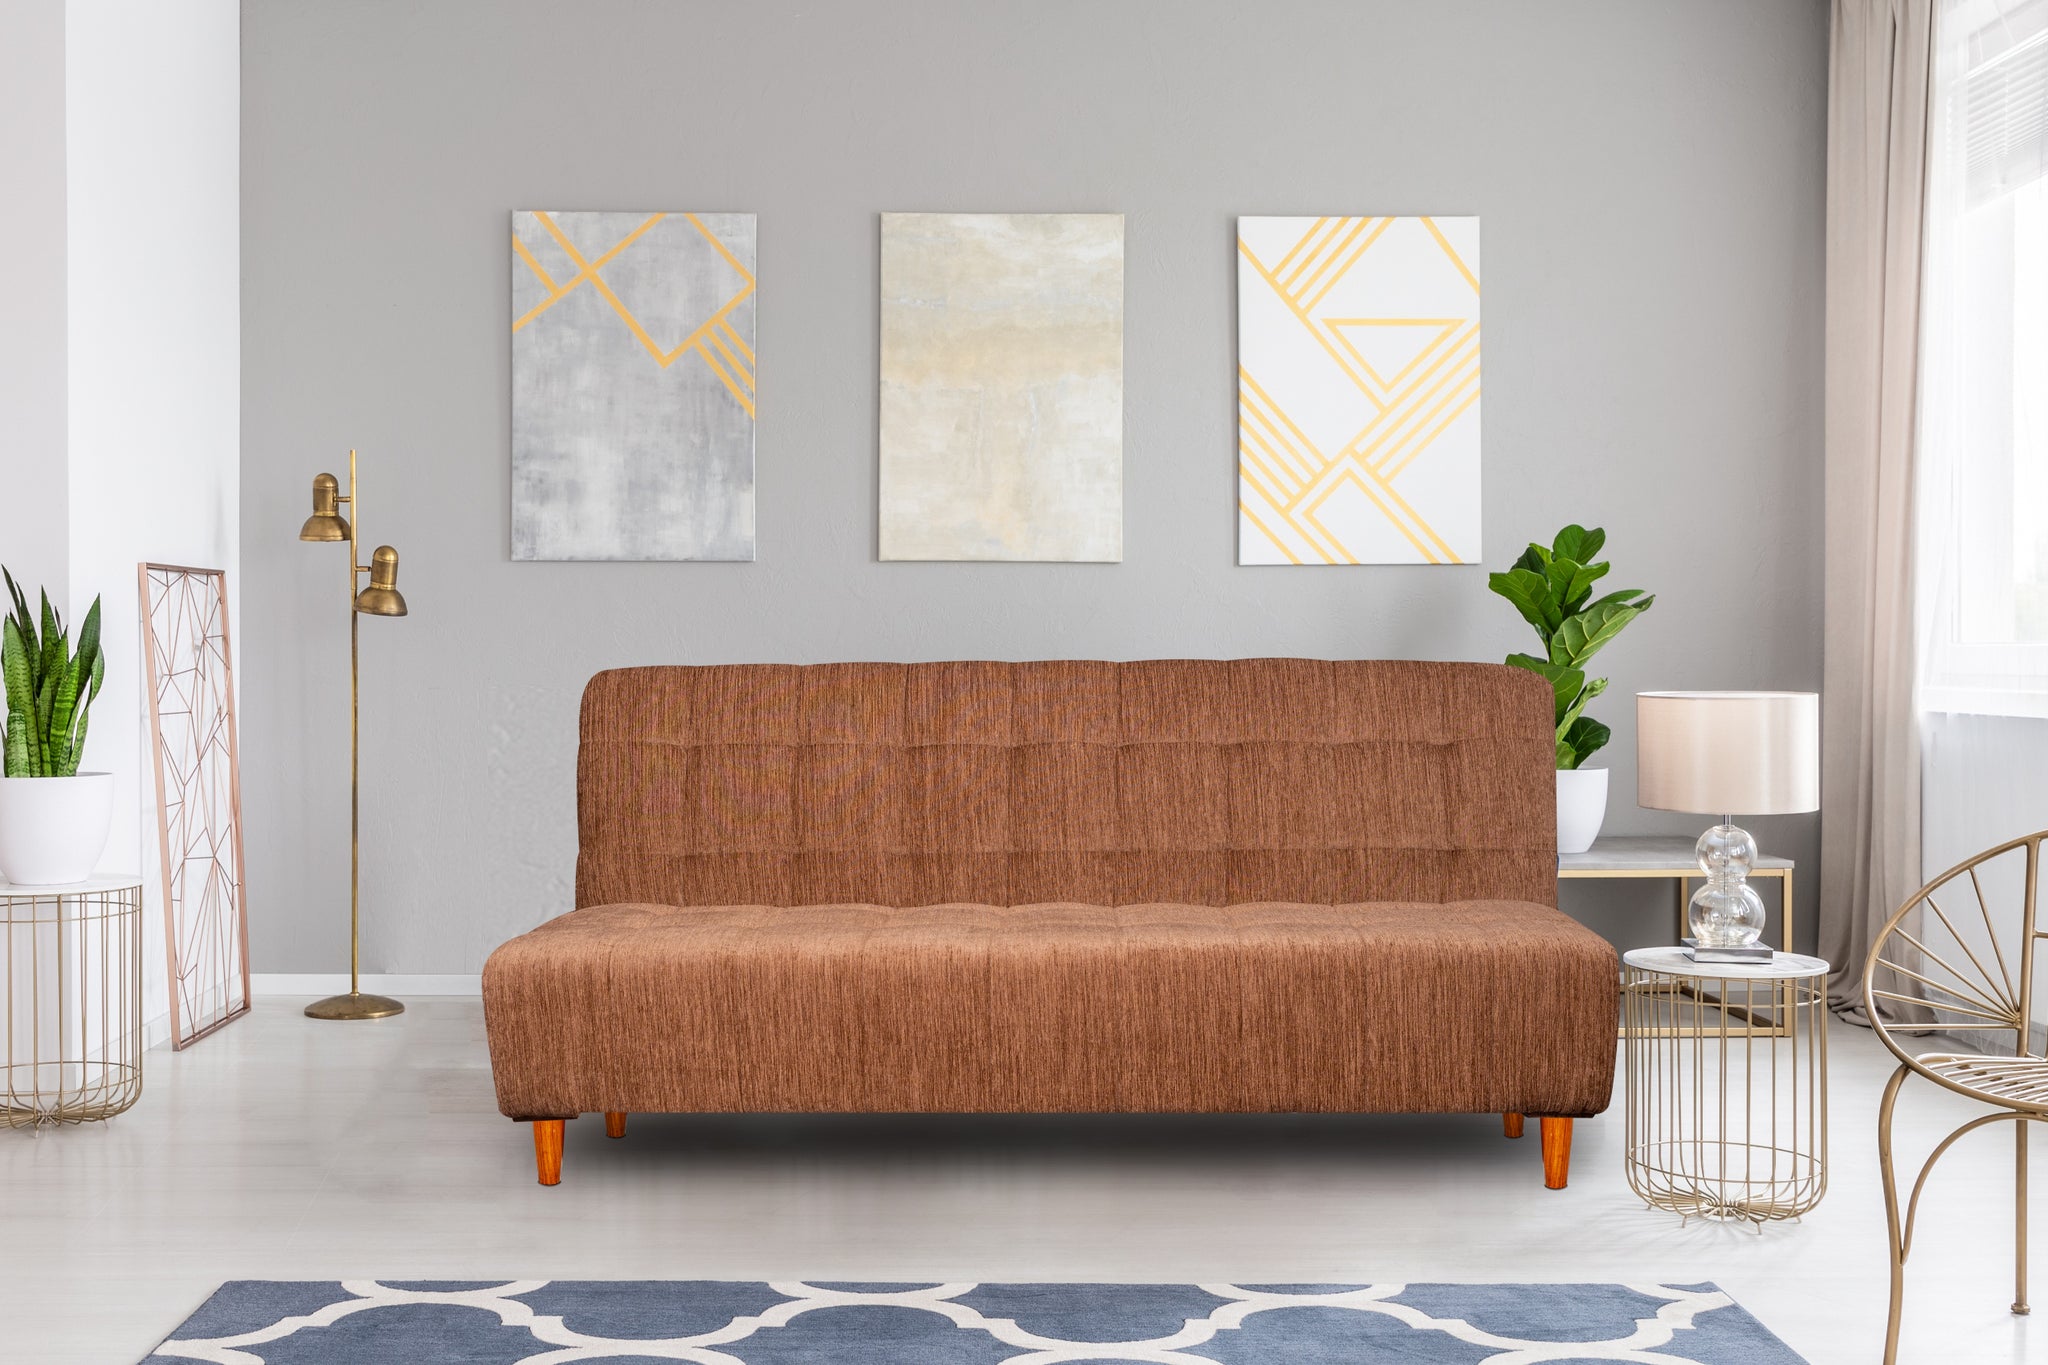 Seventh Heaven Florida 4 Seater Wooden Sofa Cum Bed. Modern & Elegant Smart Furniture Range for luxurious homes, living rooms and offices. Use as a sofa, lounger or bed. Perfect for guests. Molphino fabric with sheesham polished wooden legs. Beige colour.